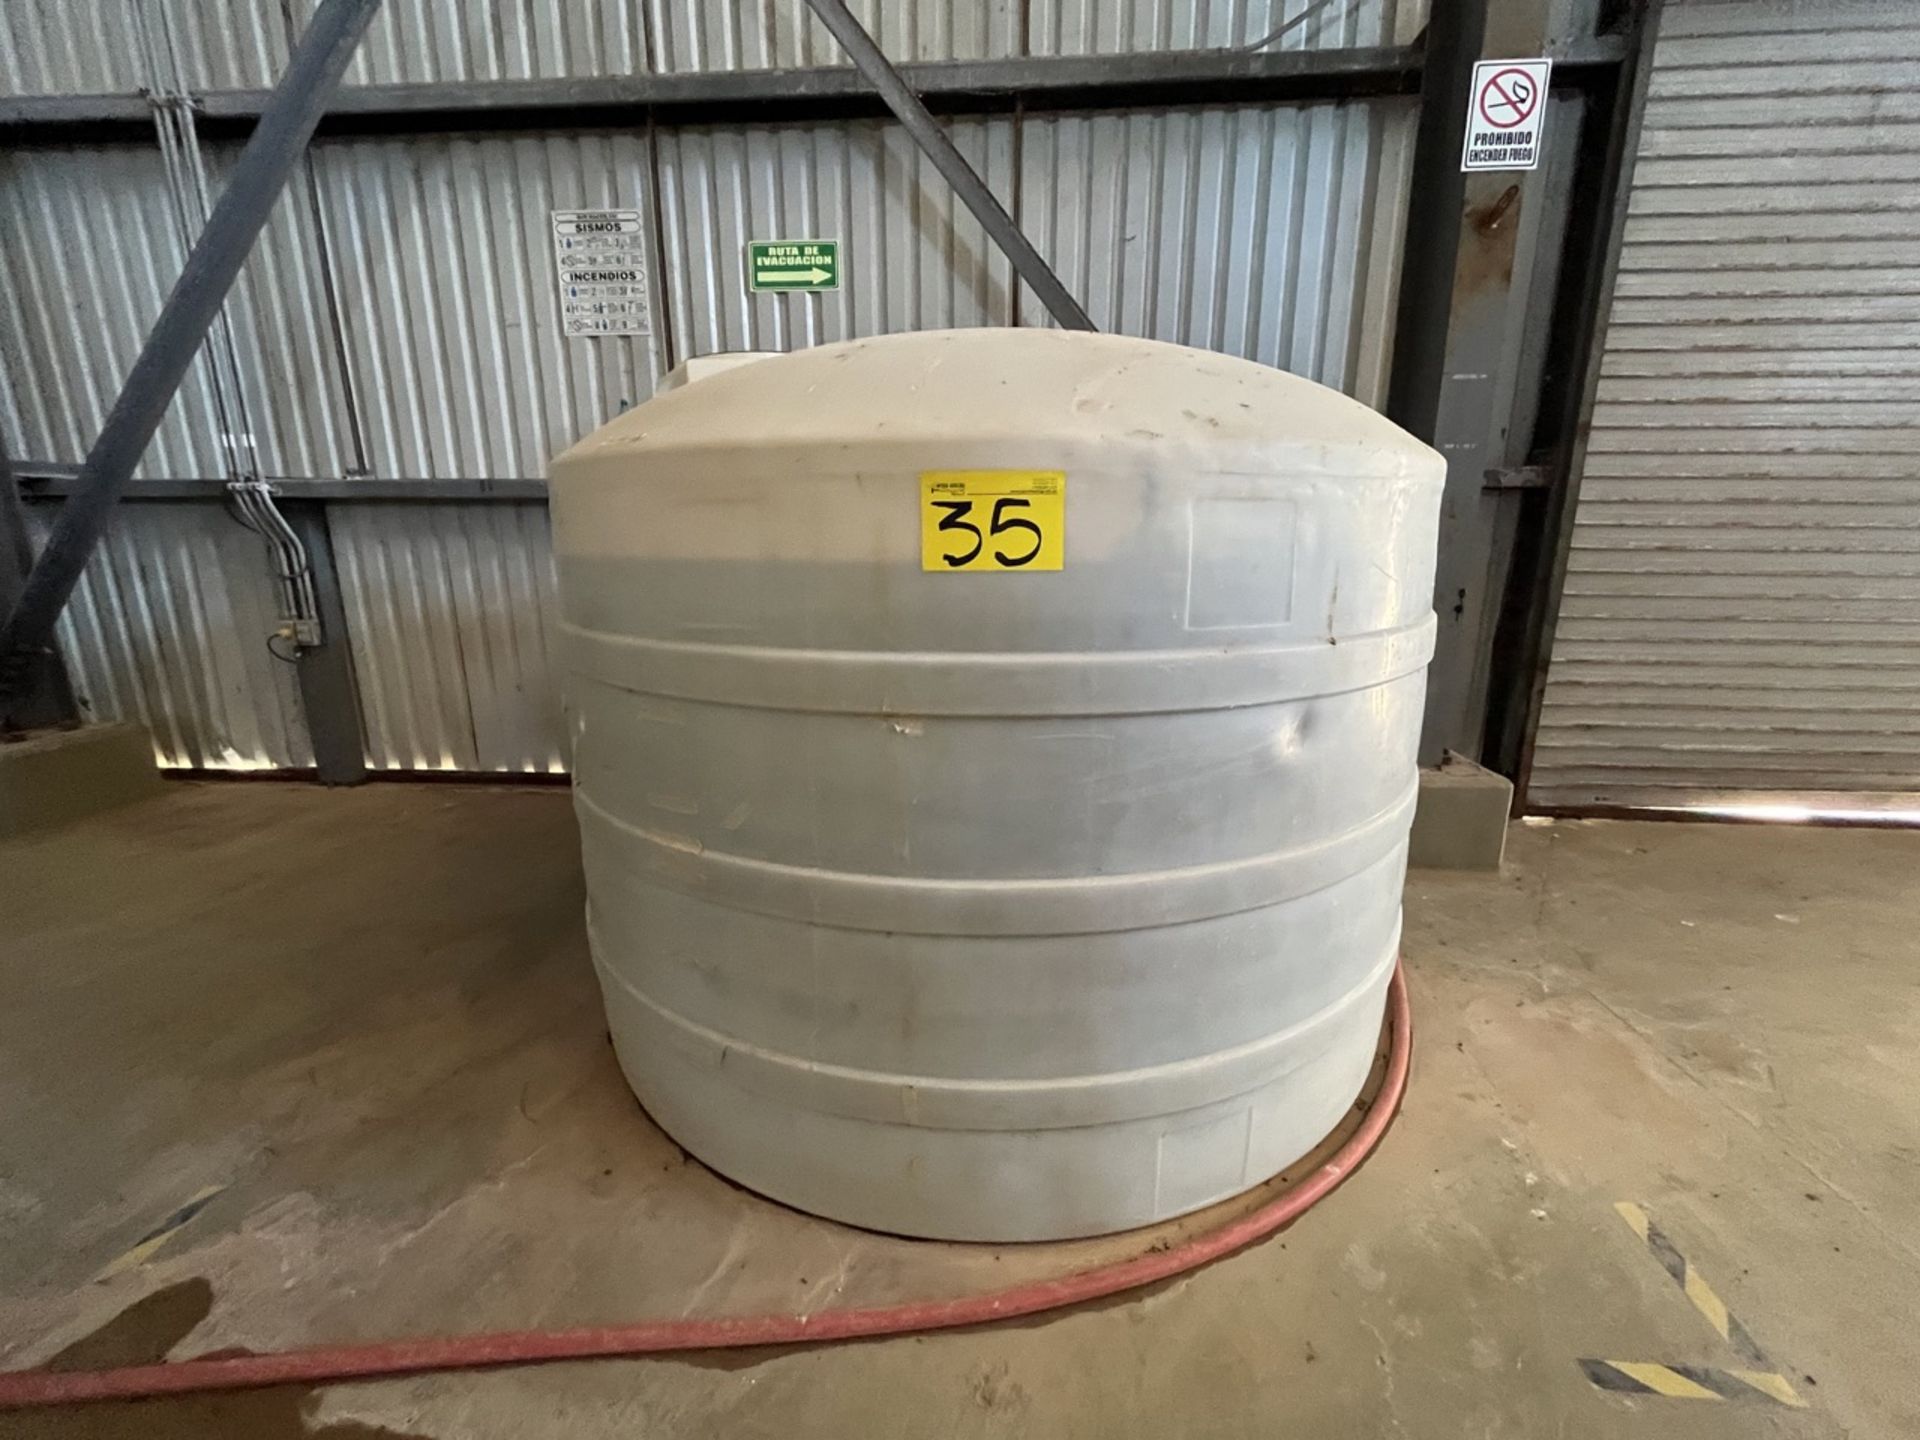 OASIS Water storage tank ,cistern type, capacity of 5 thousand liters approx, measures approx 2.10